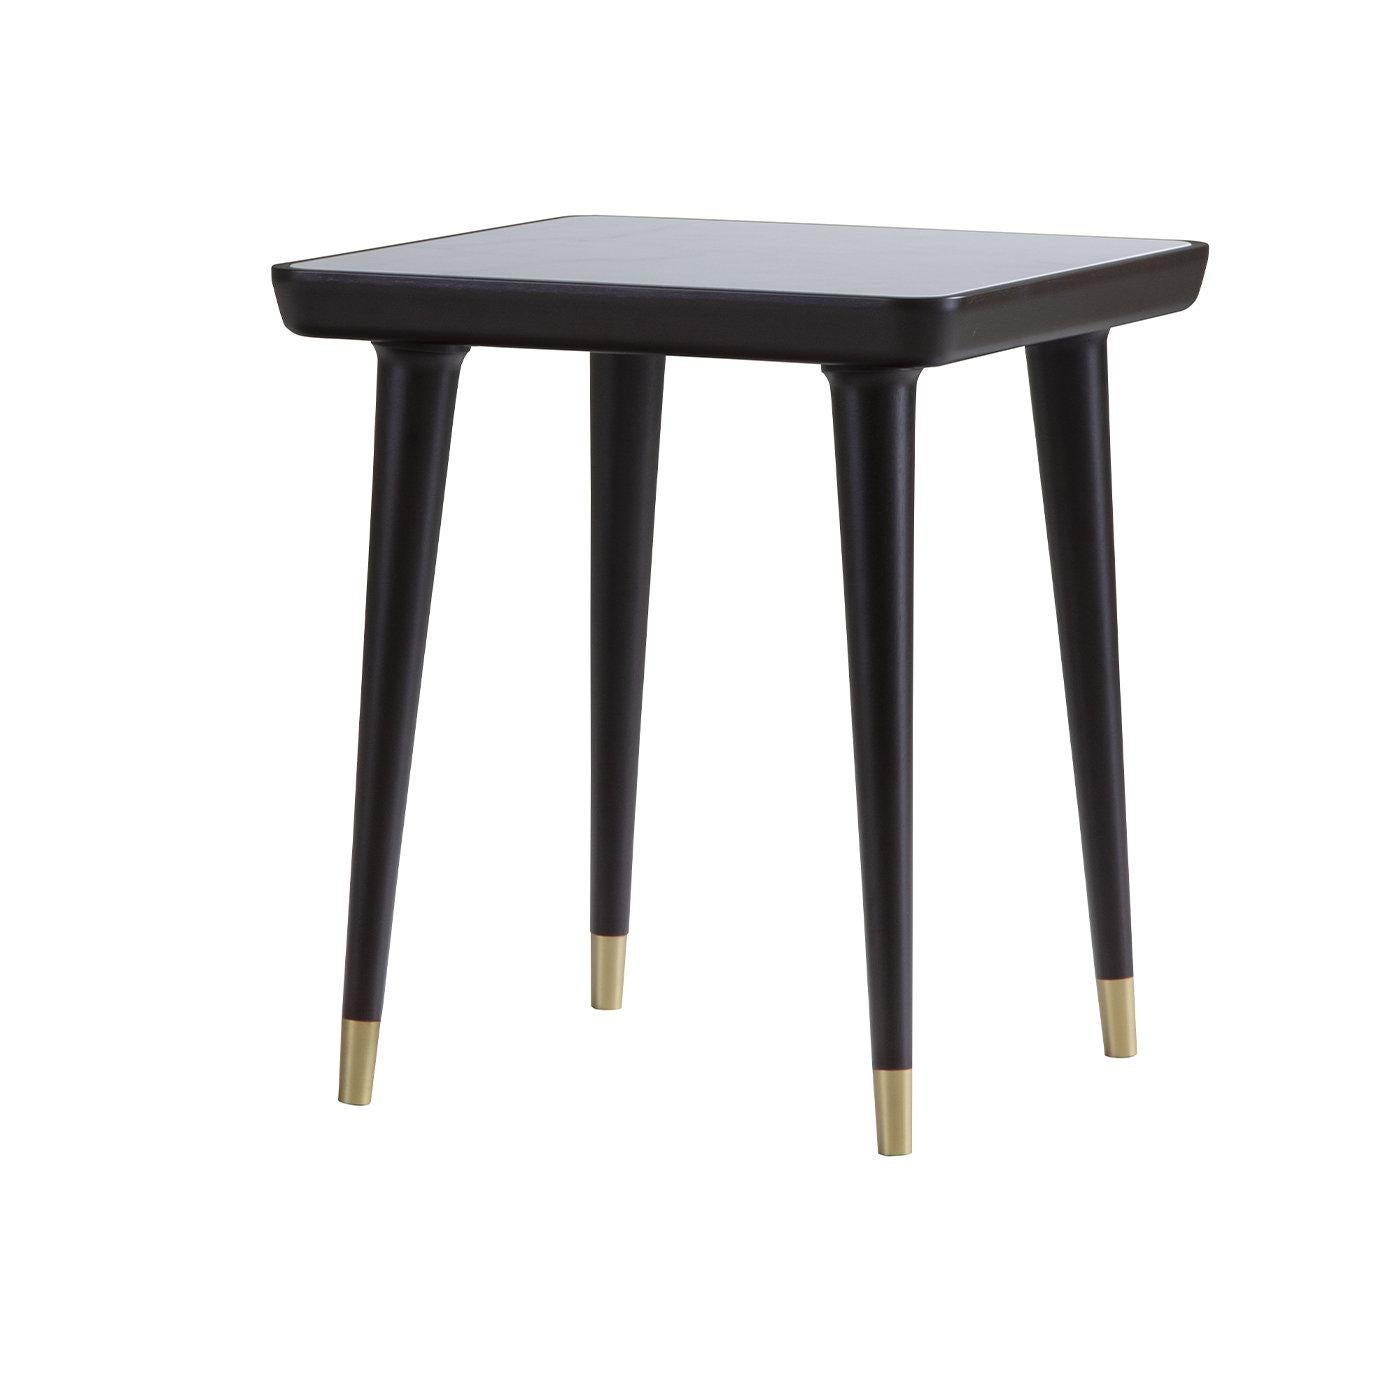 Mid-century elegance coupled with contemporary details define this superb side table. The sleek design is raised on tapered legs and its overall structure in dark-brown-finished walnut lends it visual depth. Satin brass details enliven its feet,